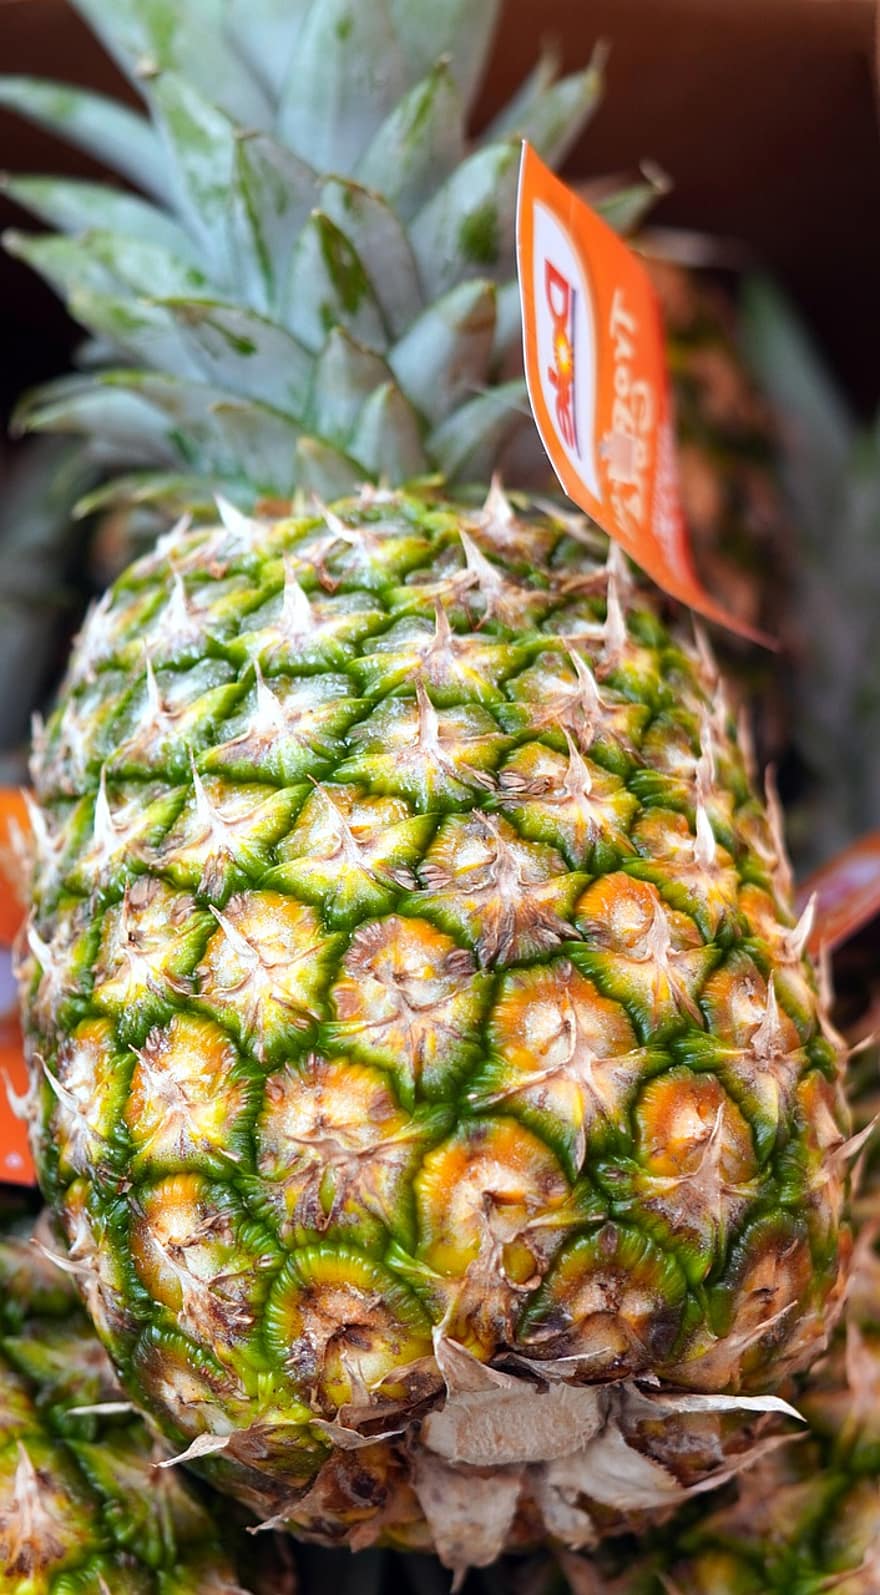 Pineapple, Fruit, Food, Produce, Tropical, Organic, Healthy, Vitamins, freshness, healthy eating, close-up